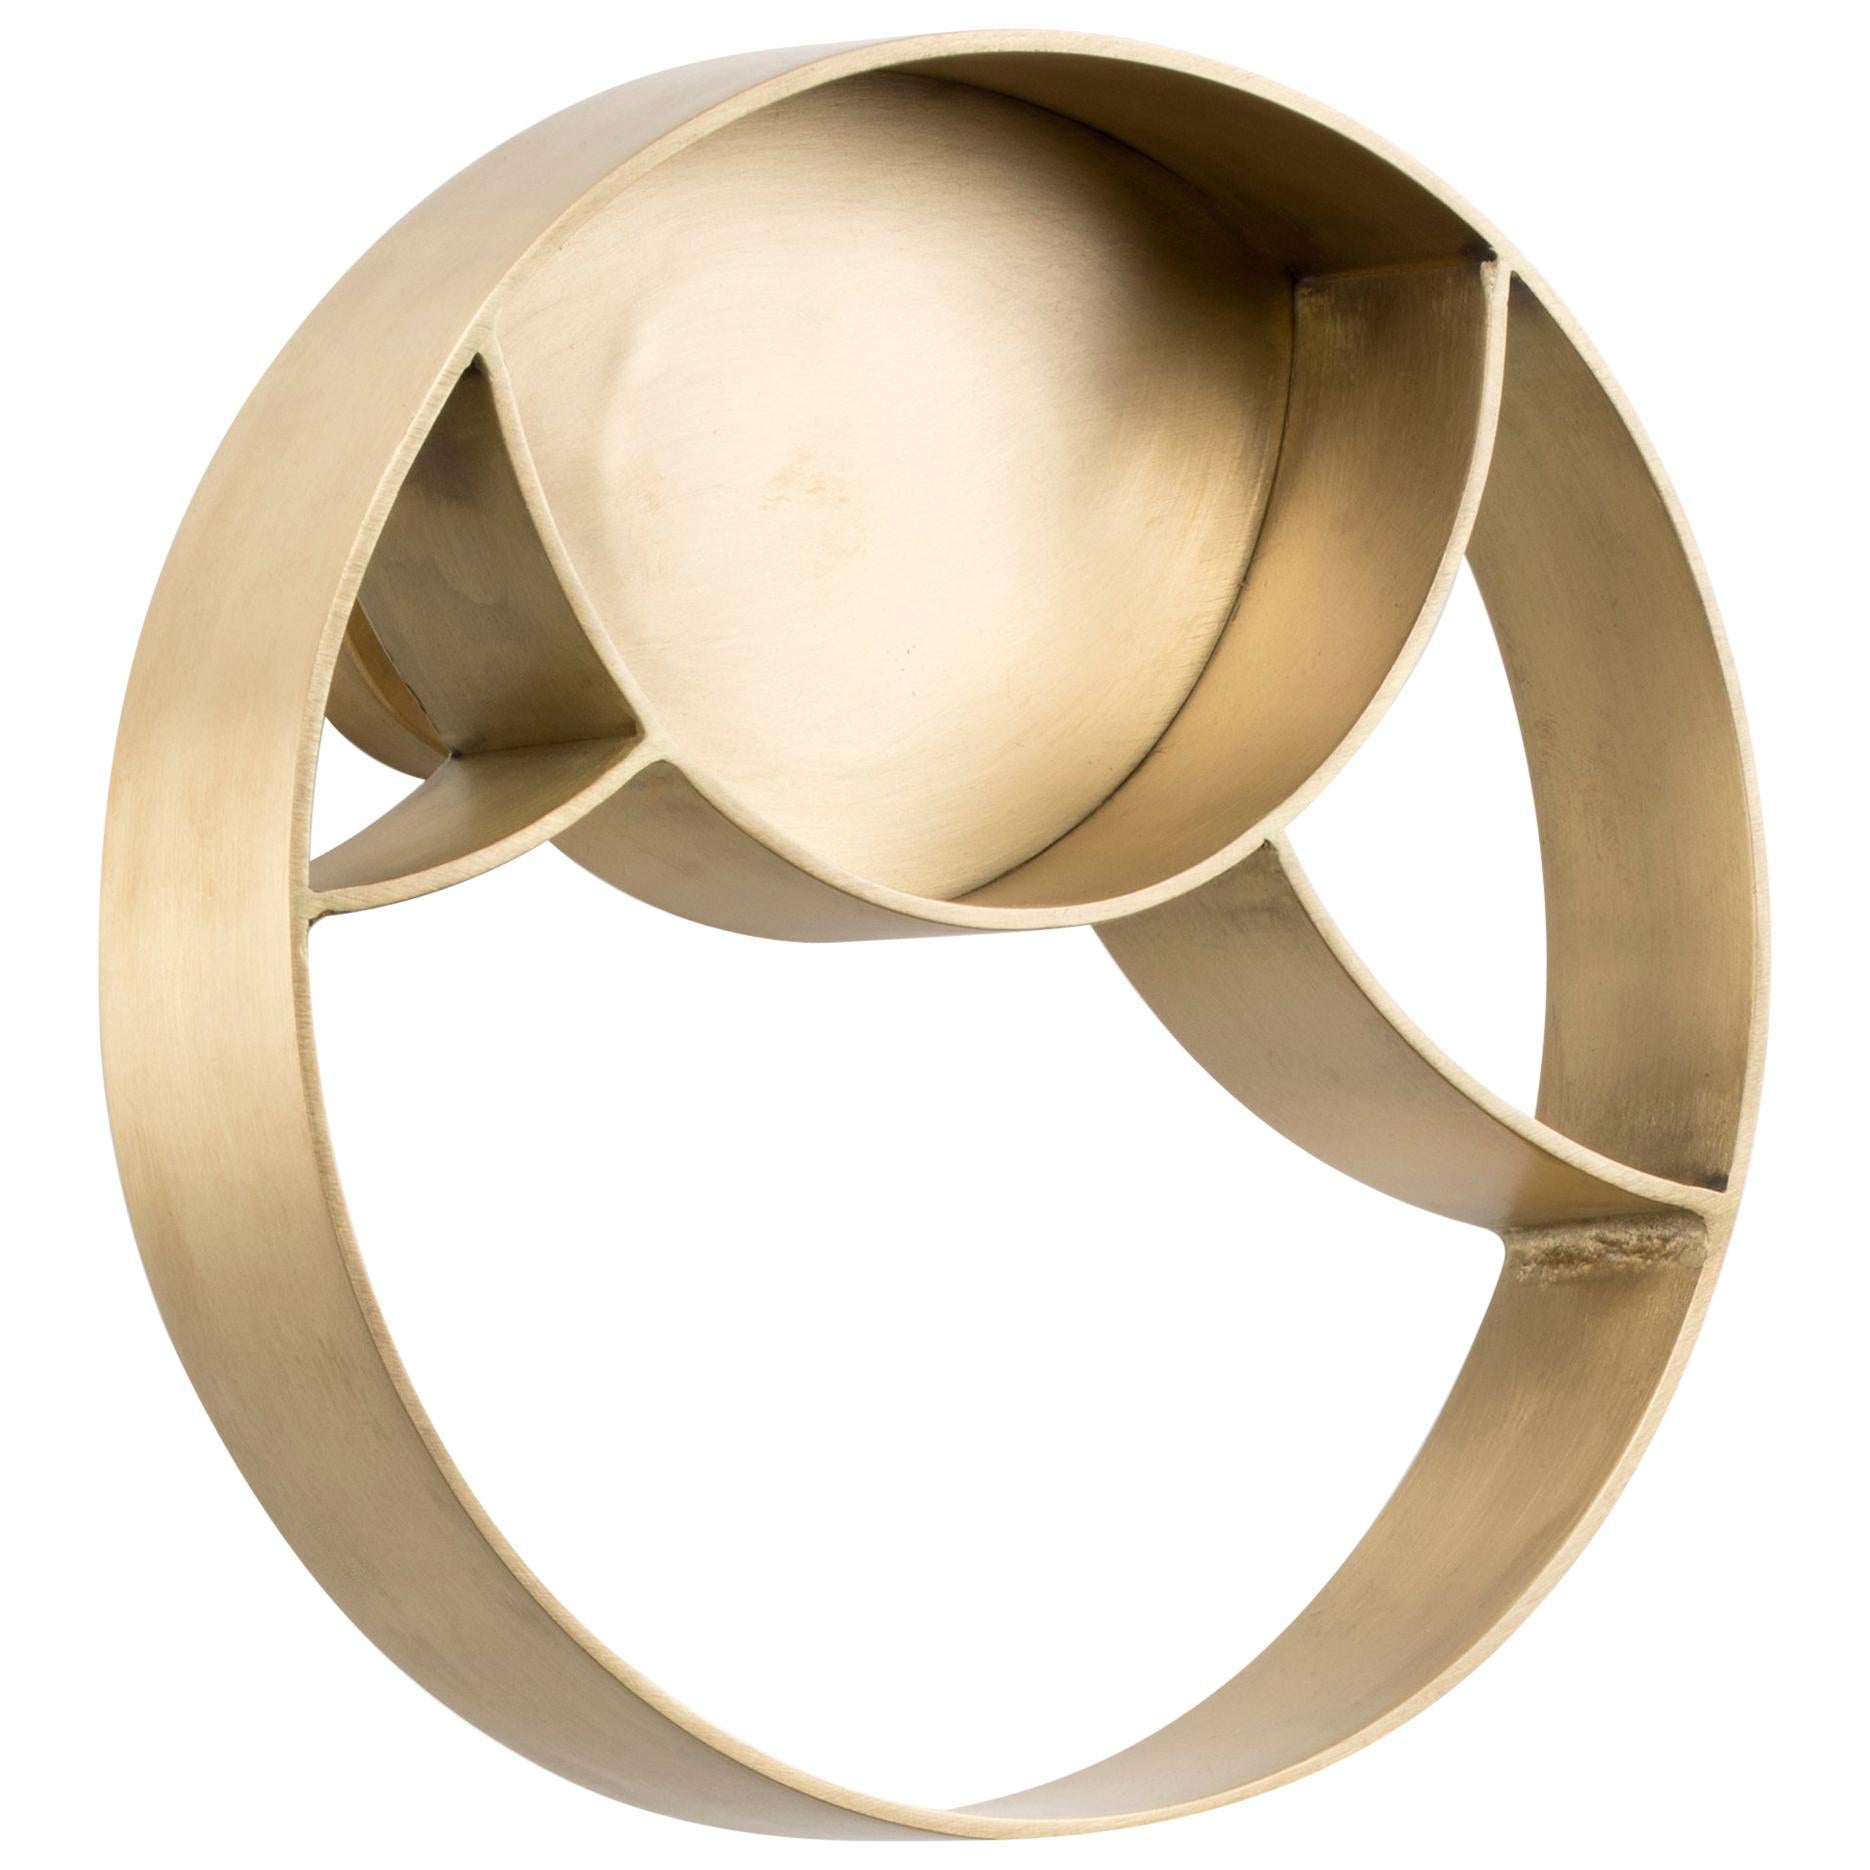 Koi Towel Ring in Aged Brushed Brass